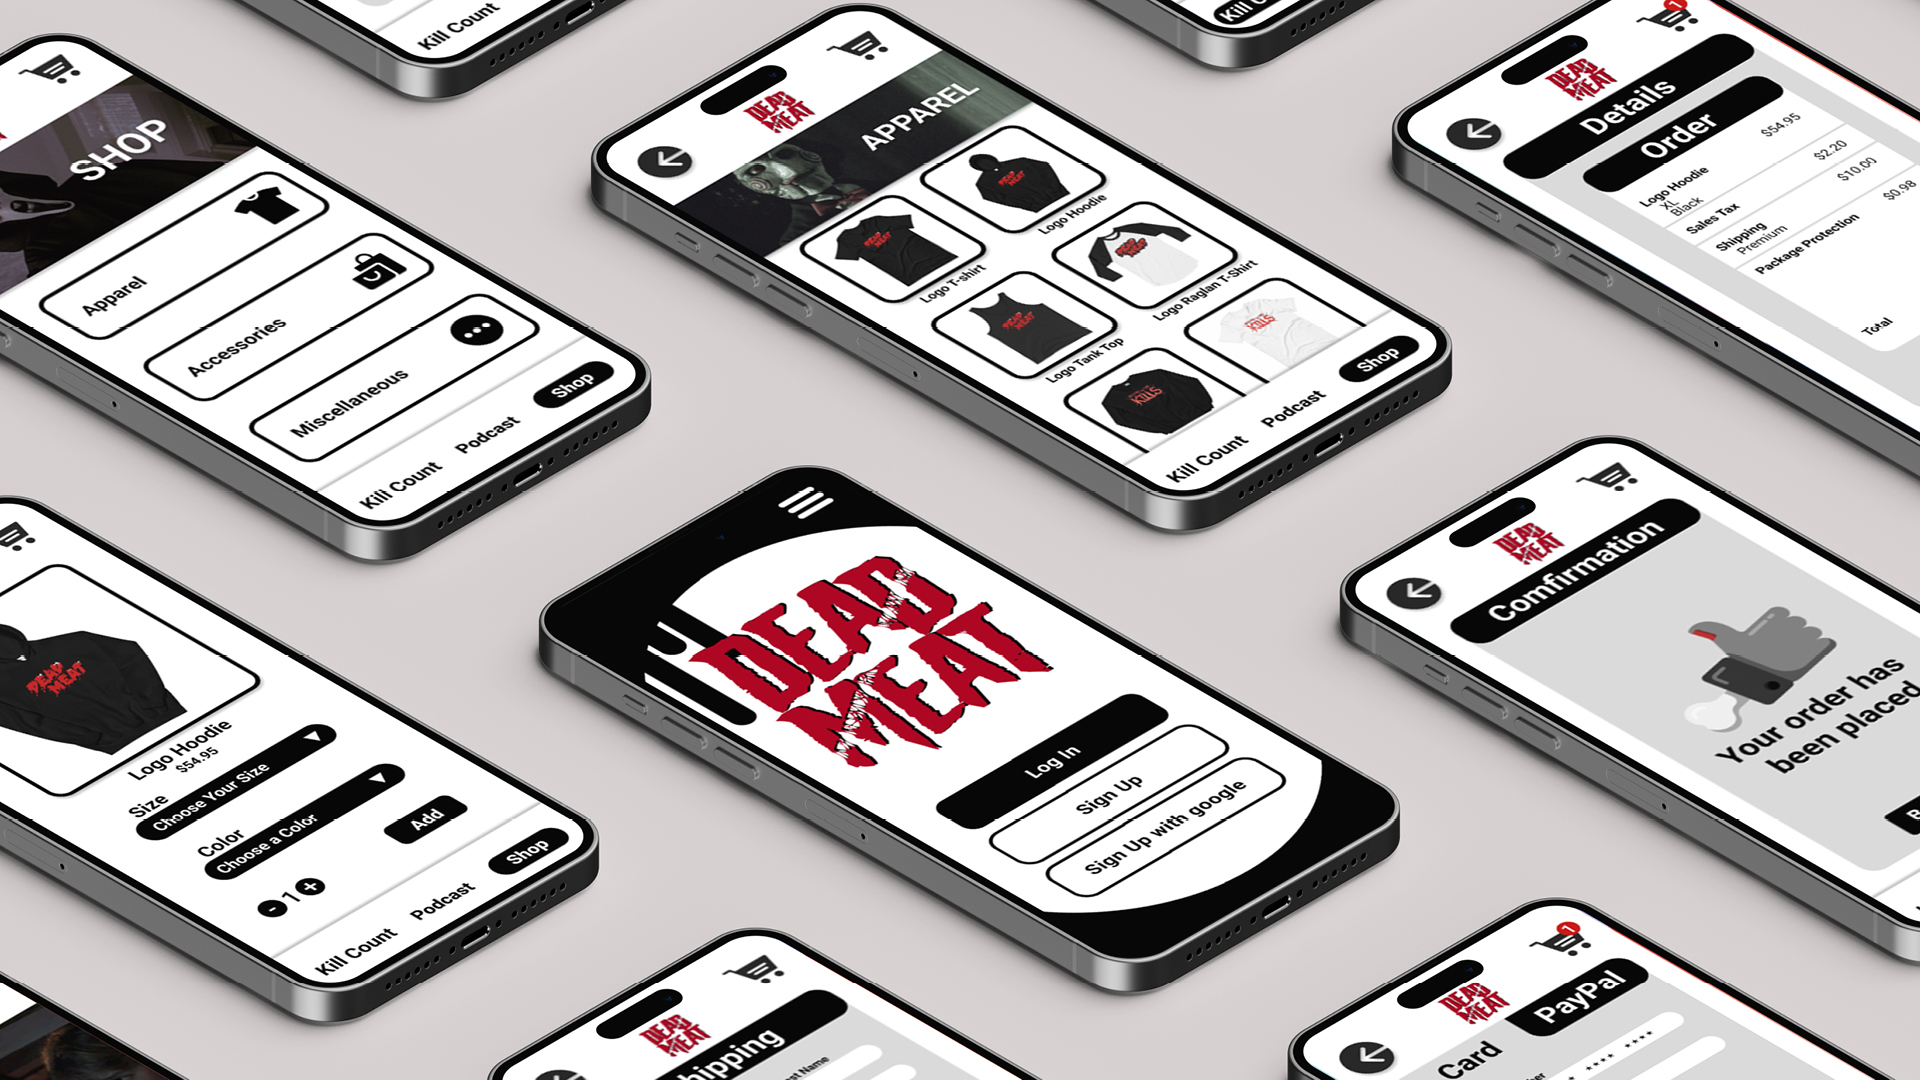 Dead Meat App / Dead Meat App, app design, 2022. This app was intended to sell merchandise from the horror podcast Dead Meat. It was designed to have a simplistic layout that would make the buying experience easy for customers.